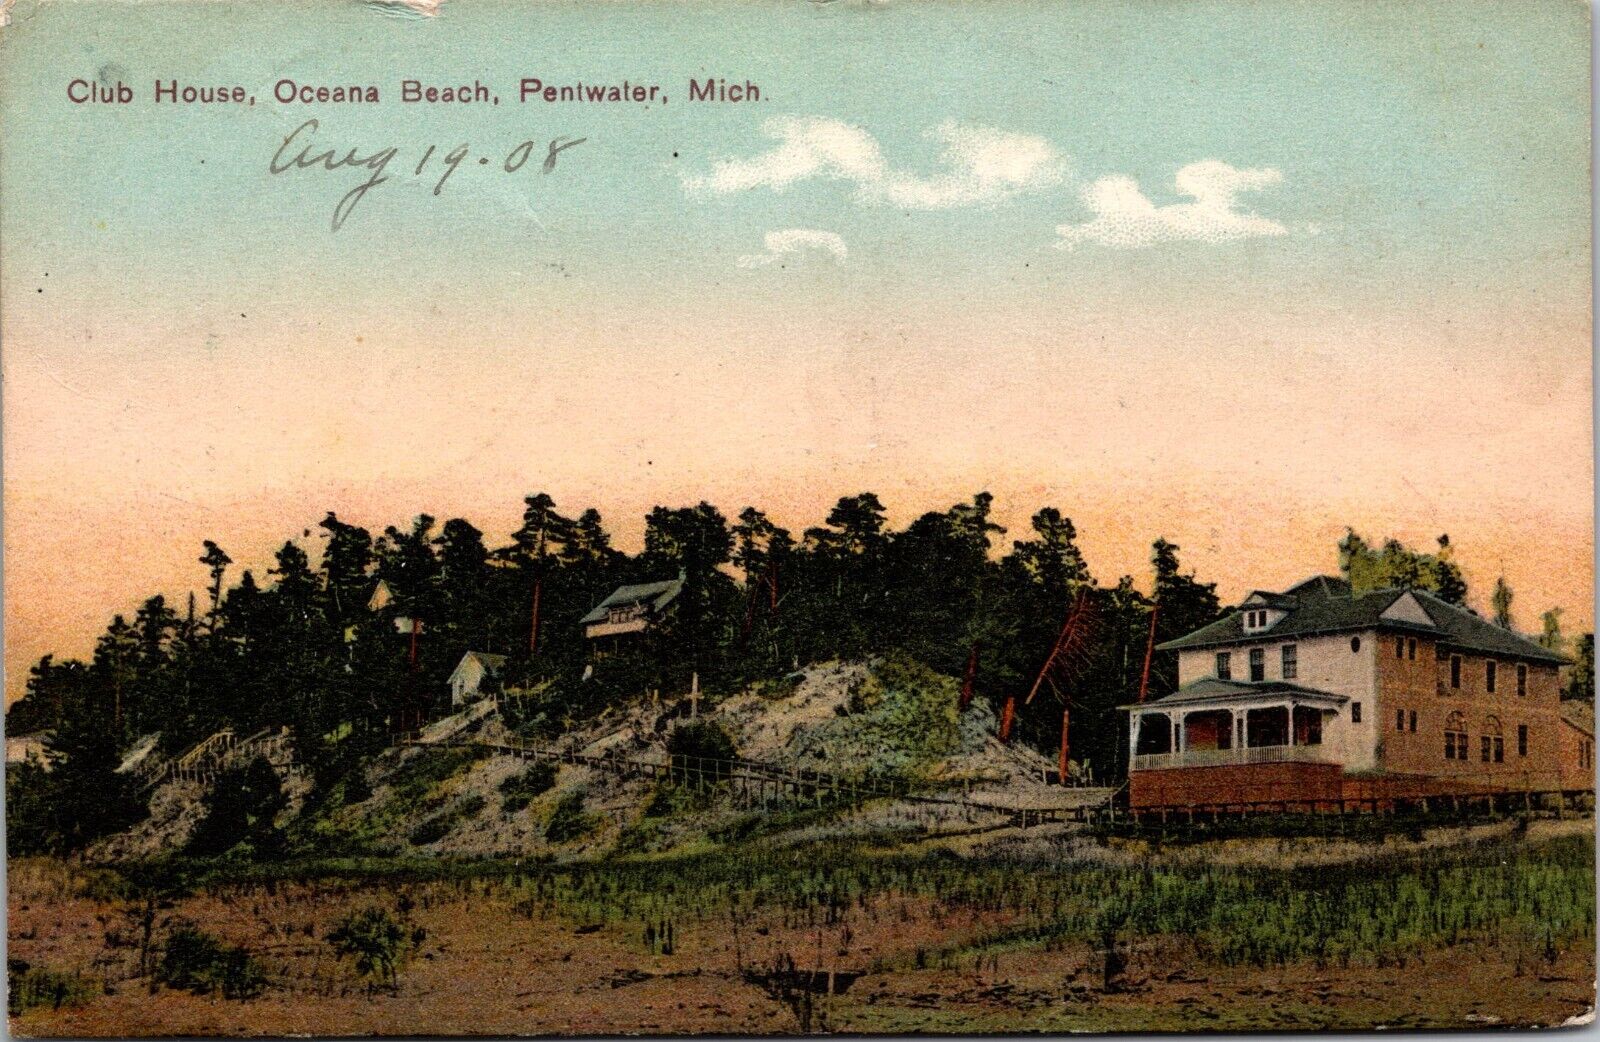 Pentwater Mich. Colorized Vintage Postcard Club House Oceana Beach Posted 1908